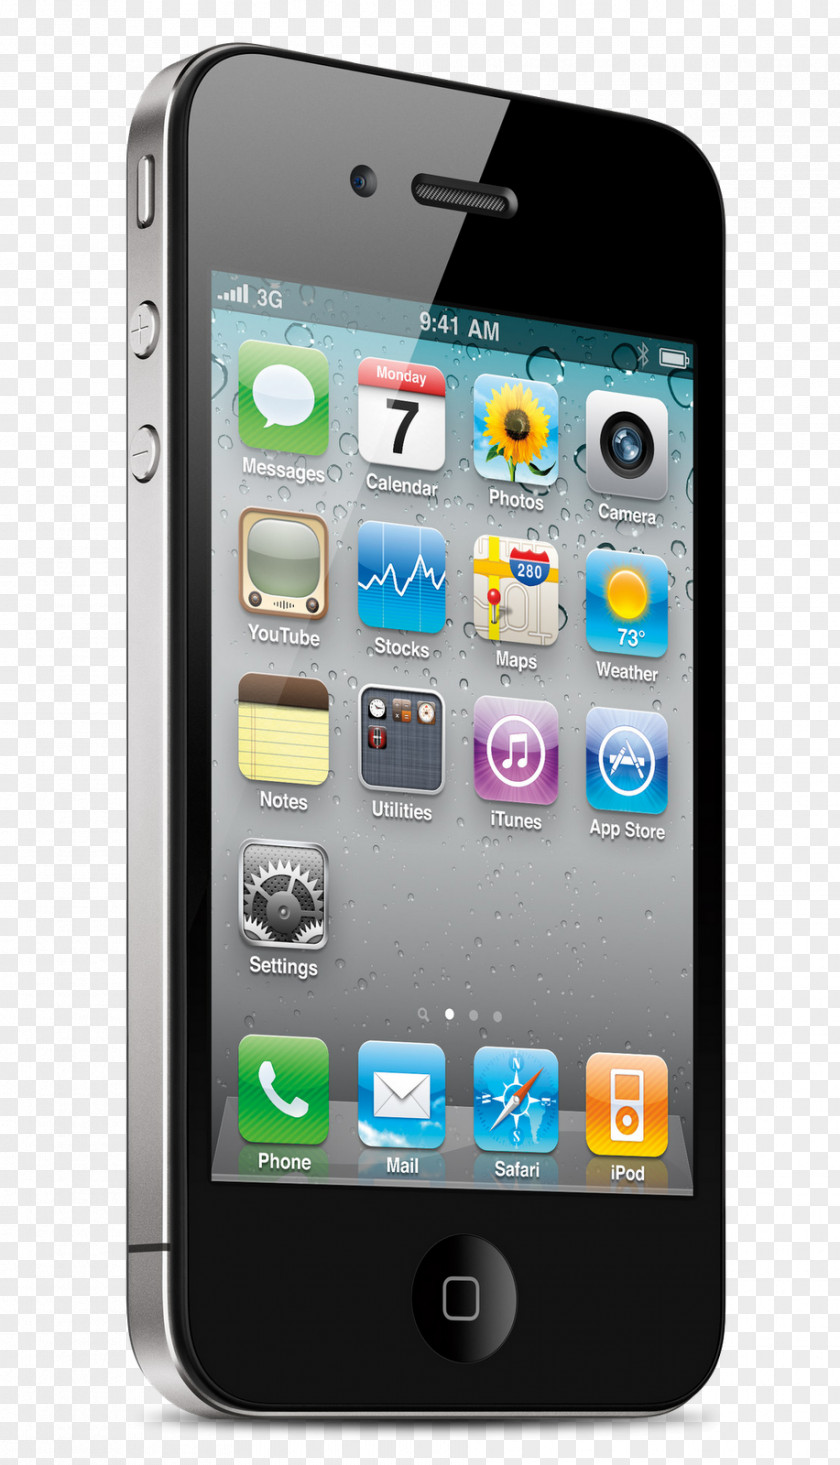 Apple IPhone 4S 3GS Worldwide Developers Conference PNG